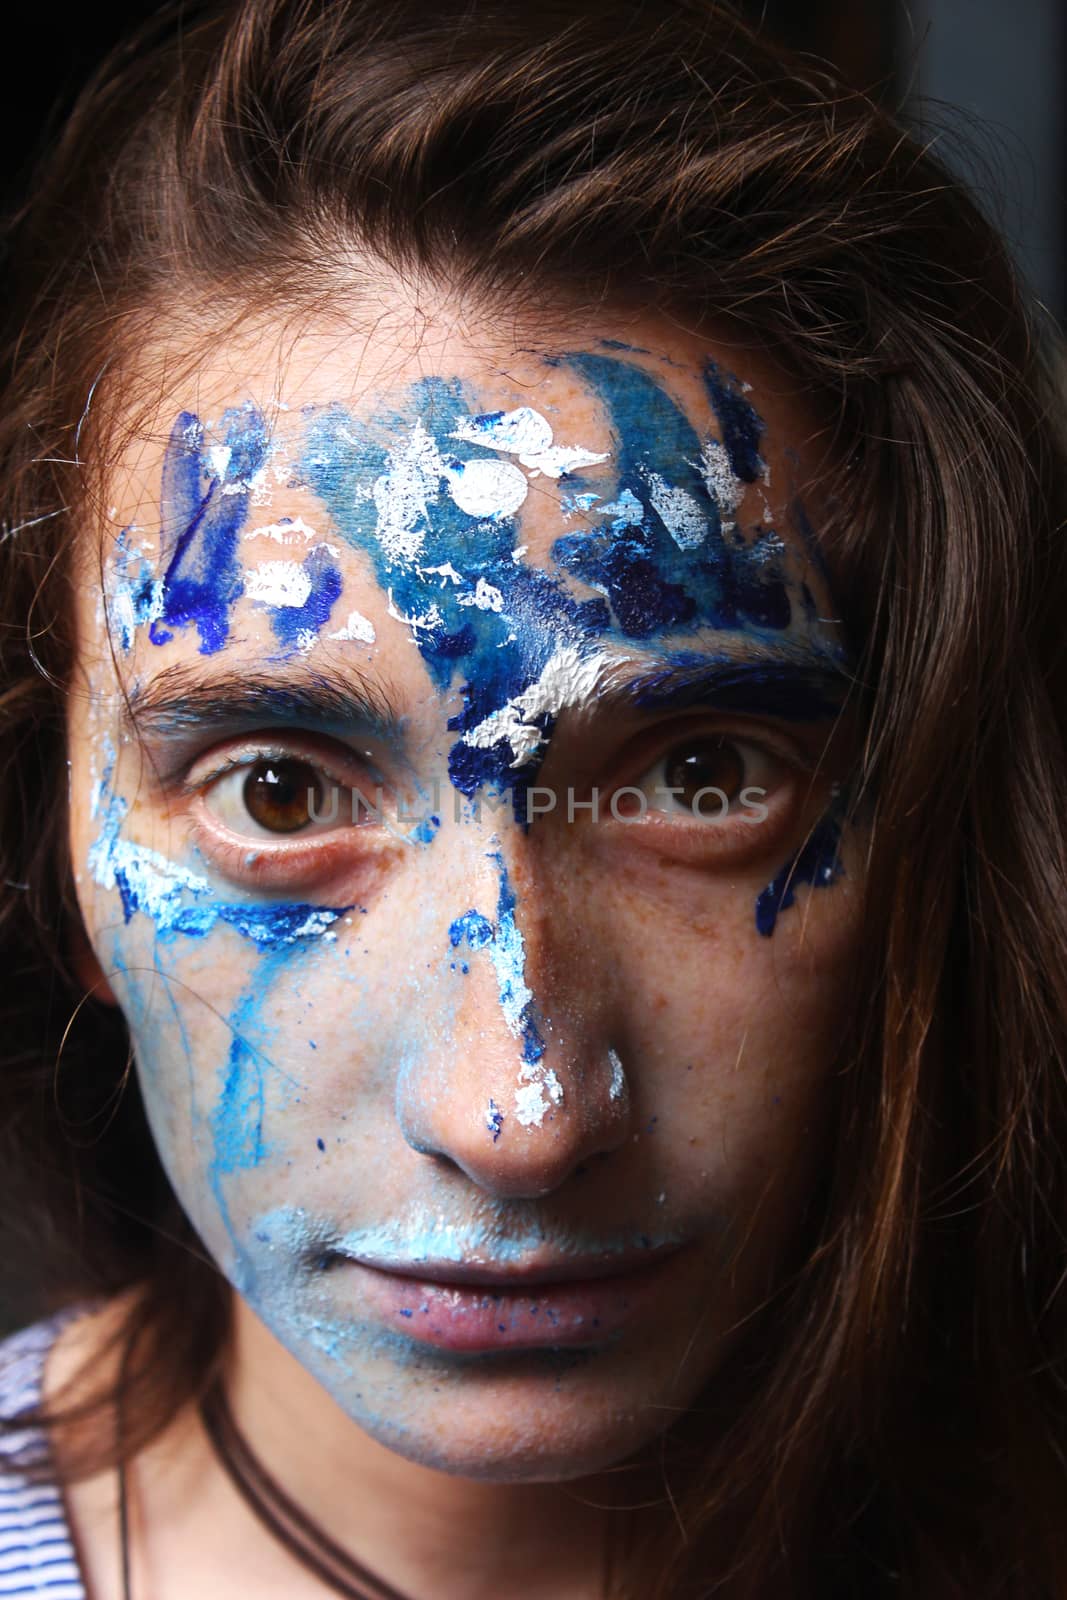 Painted face with acrylic blue and white colors. Young beautiful woman portrait, close-up photo.